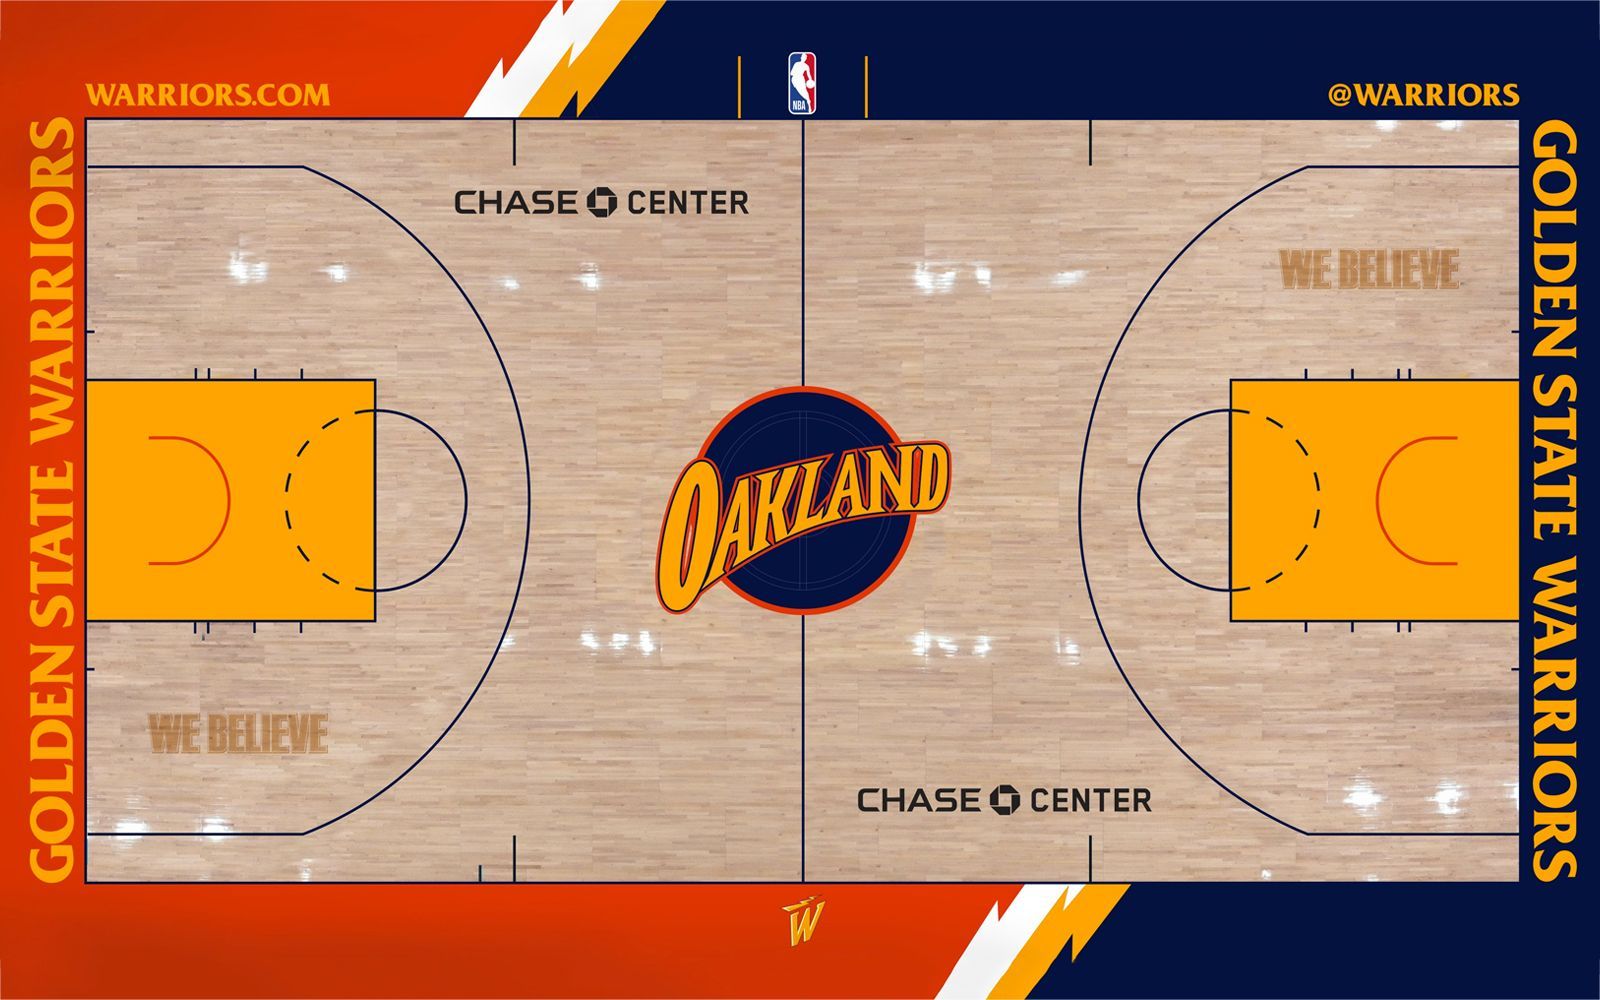 The new designs of the NBA courts